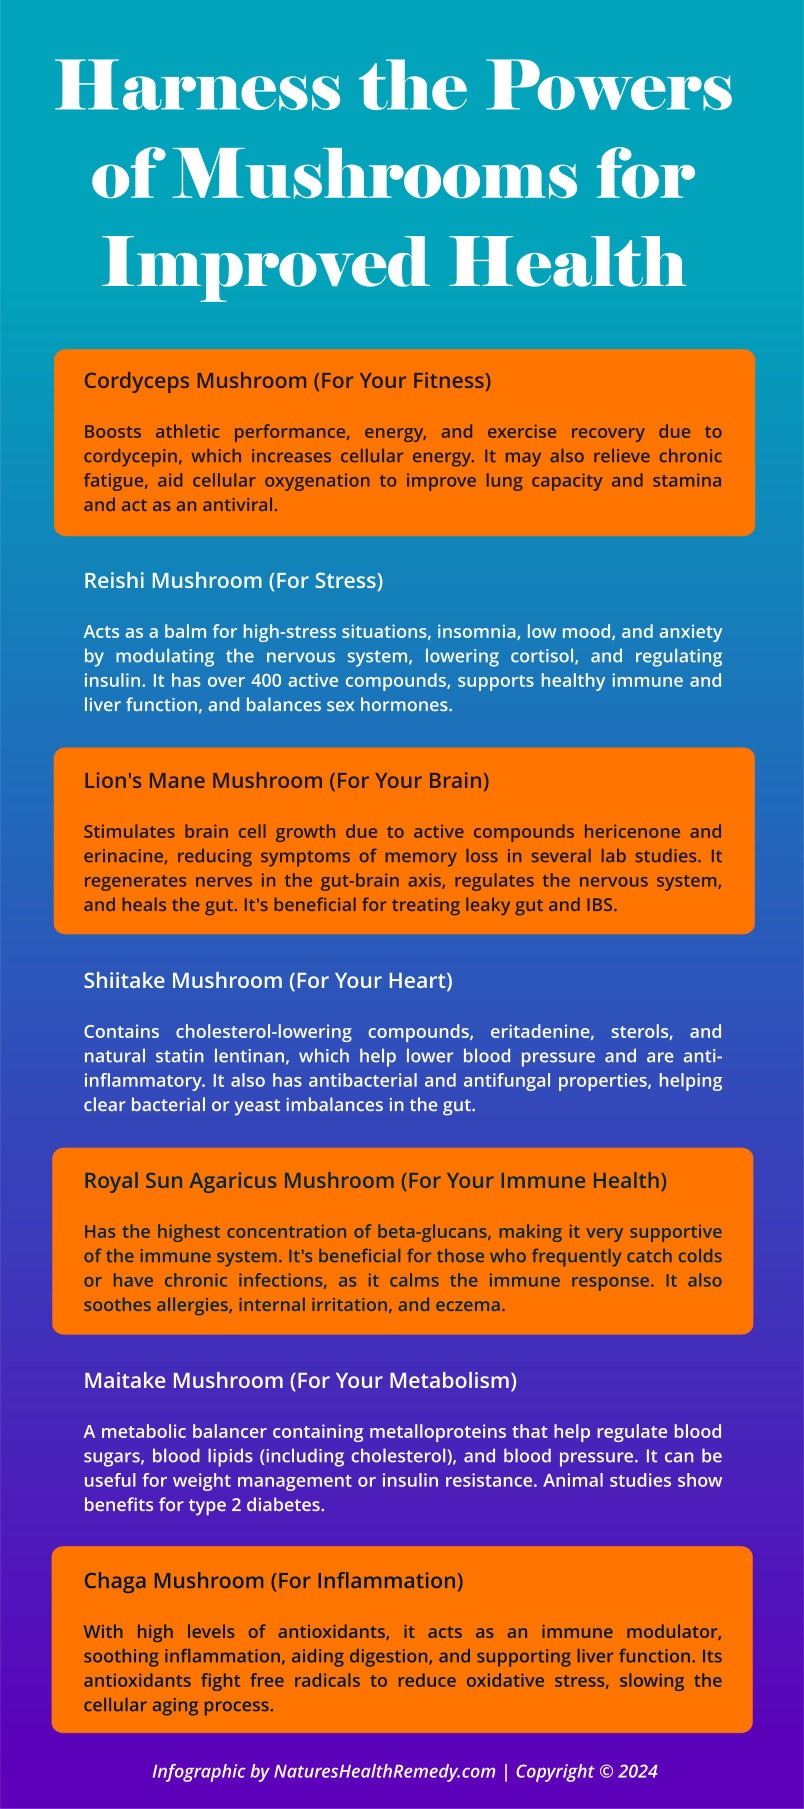 An infographic for Harness the Powers of Mushrooms for Improved Health at NatureHealthRemedy.com